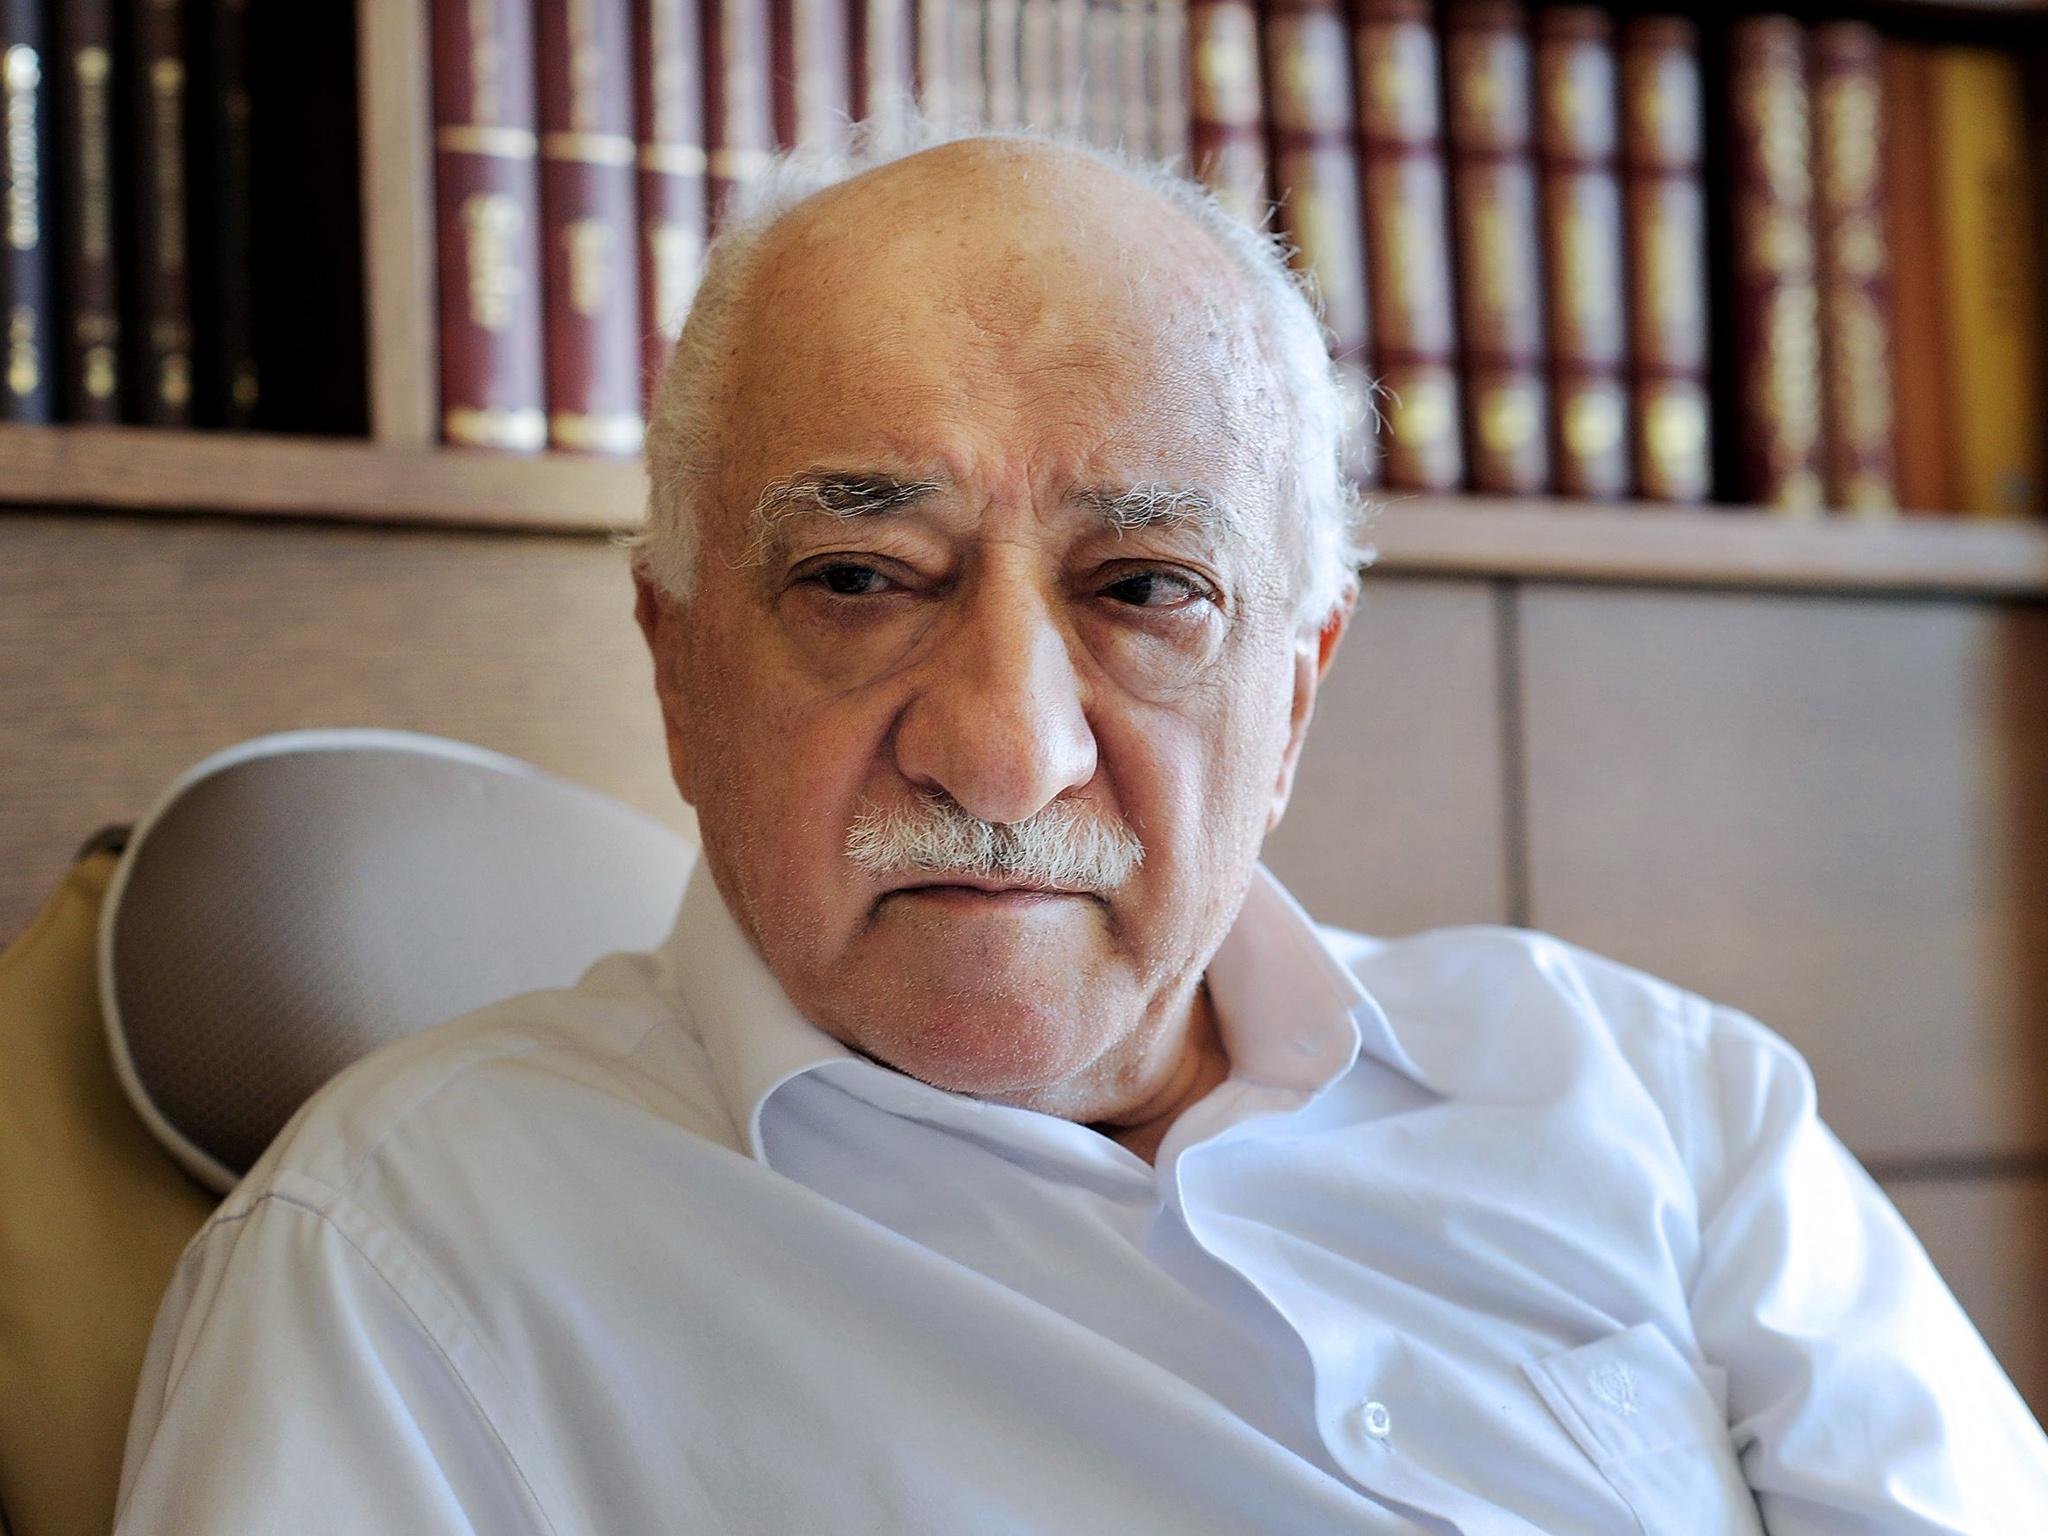 The Turkish government believe Fethullah Gülen is behind the recent coup attempt